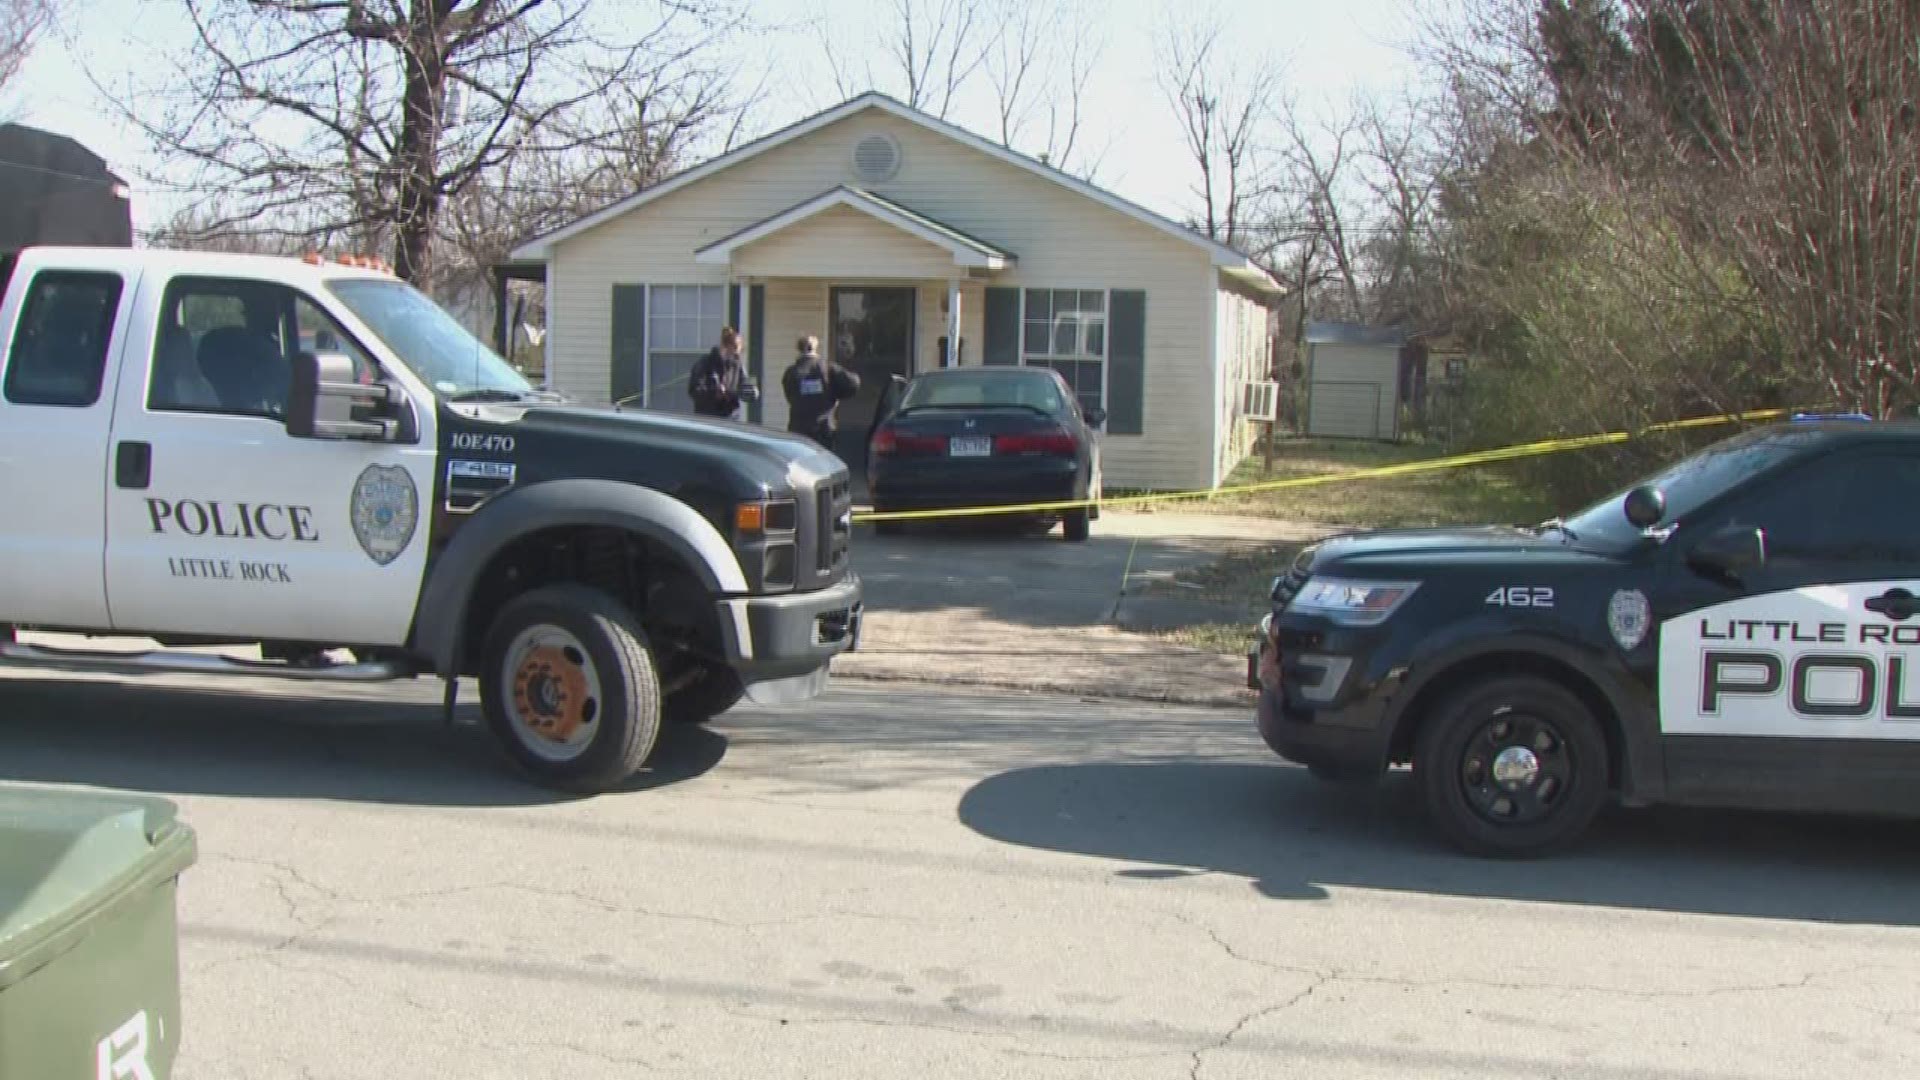 Police say a man attacked a woman with a knife, stabbing her multiple times in broad daylight.